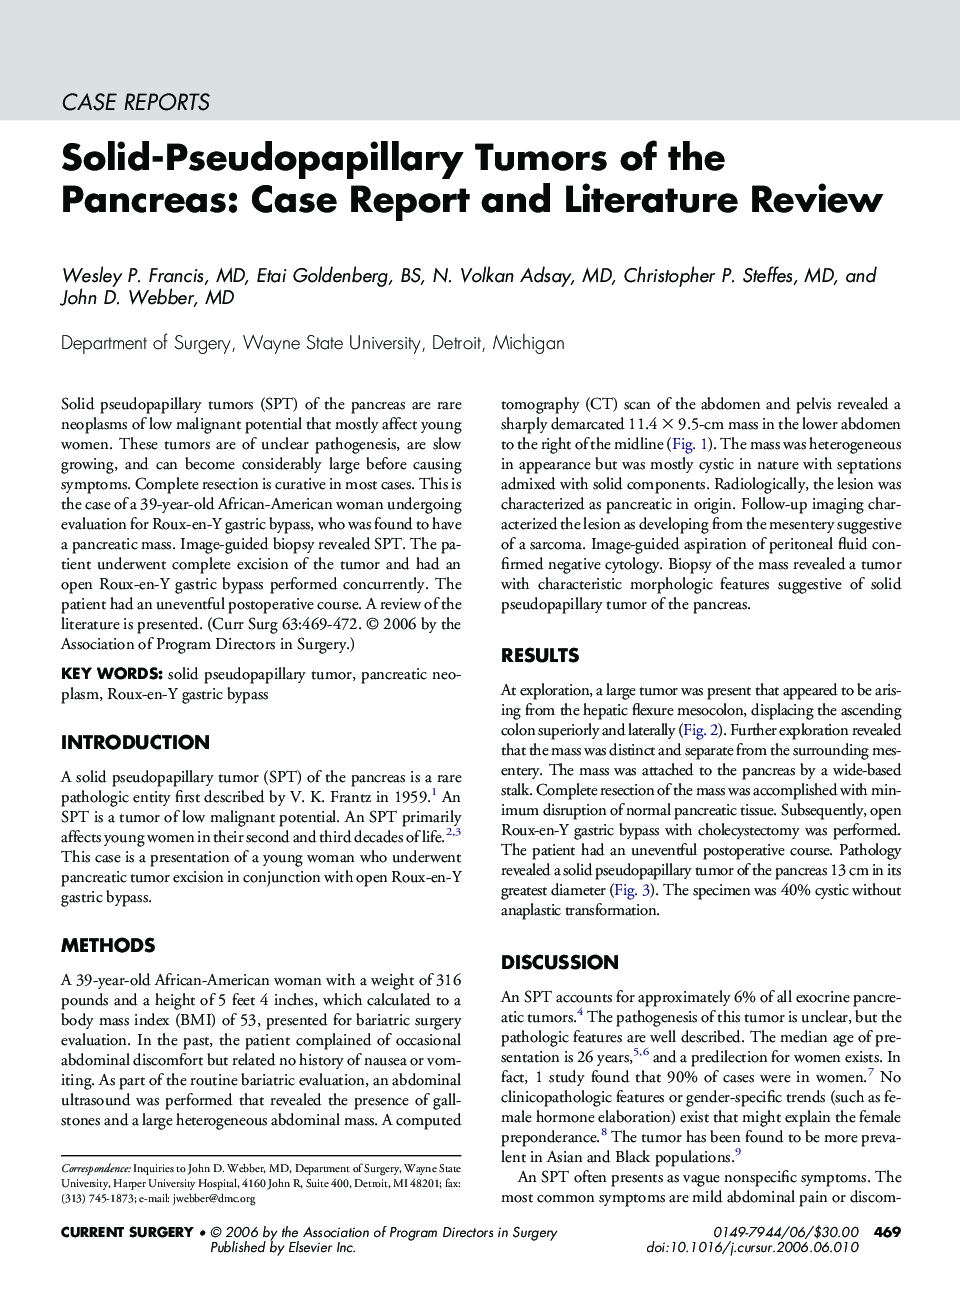 Solid-Pseudopapillary Tumors of the Pancreas: Case Report and Literature Review